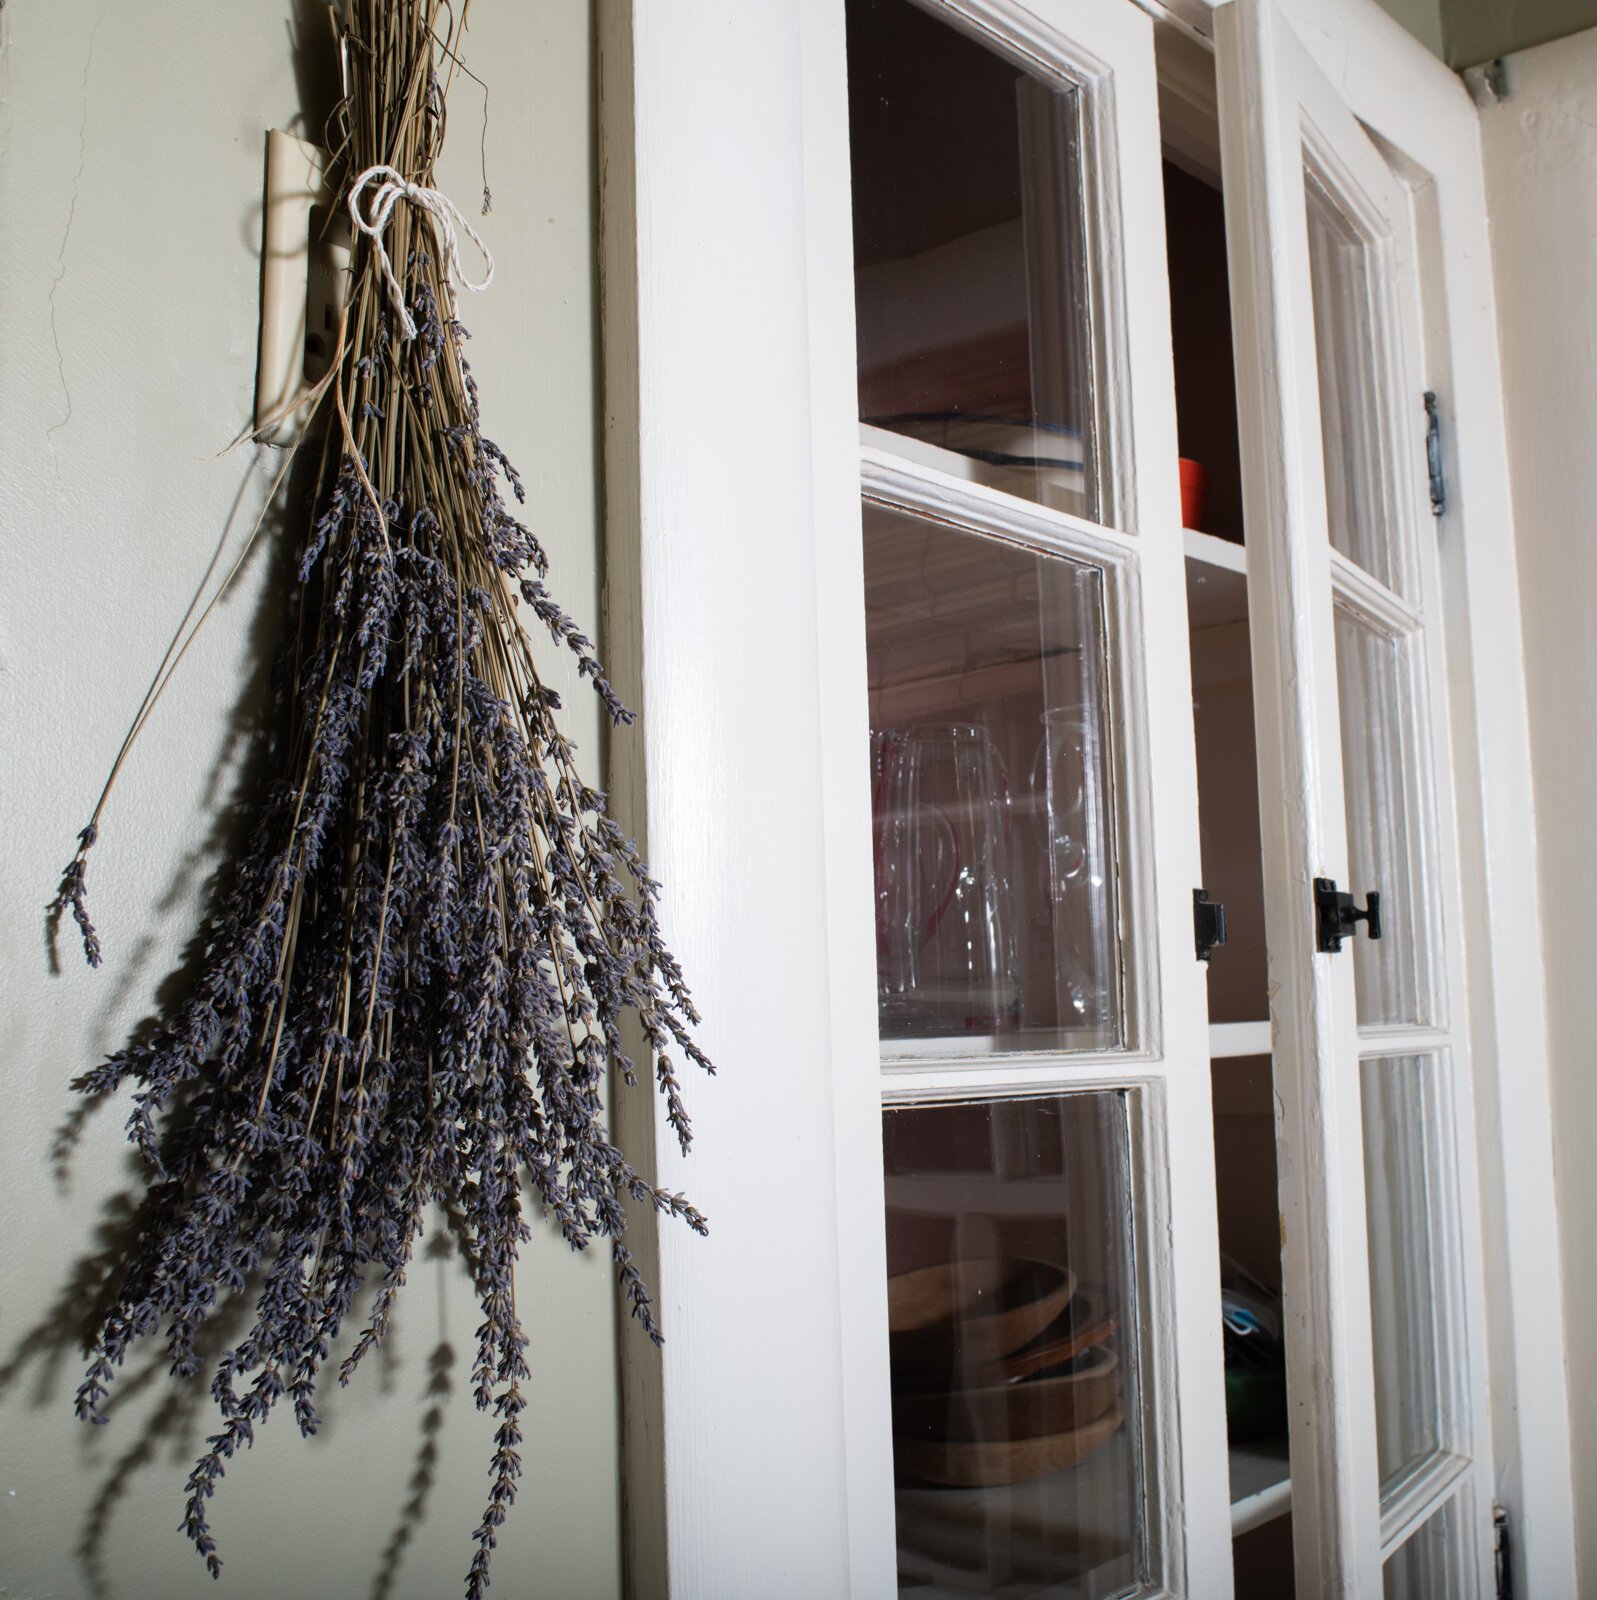 Lavender hangs from the wall.